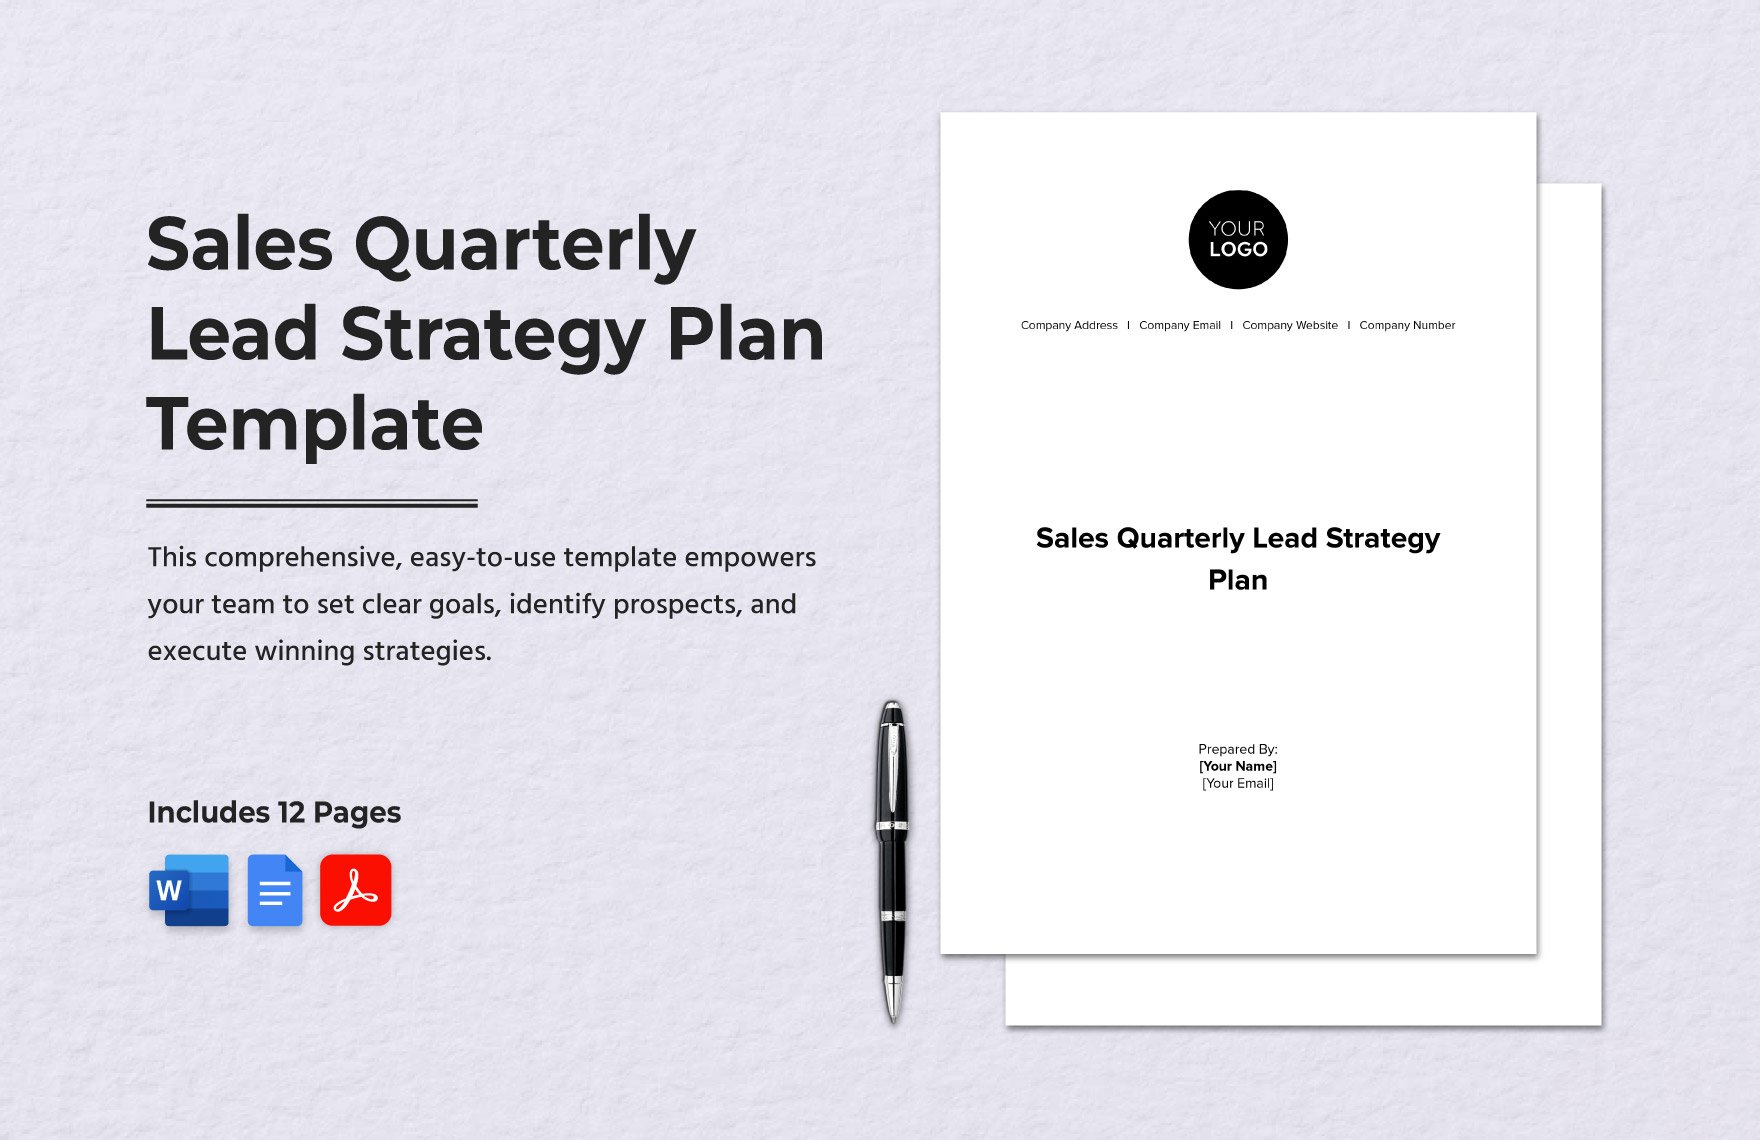 Sales Quarterly Lead Strategy Plan Template